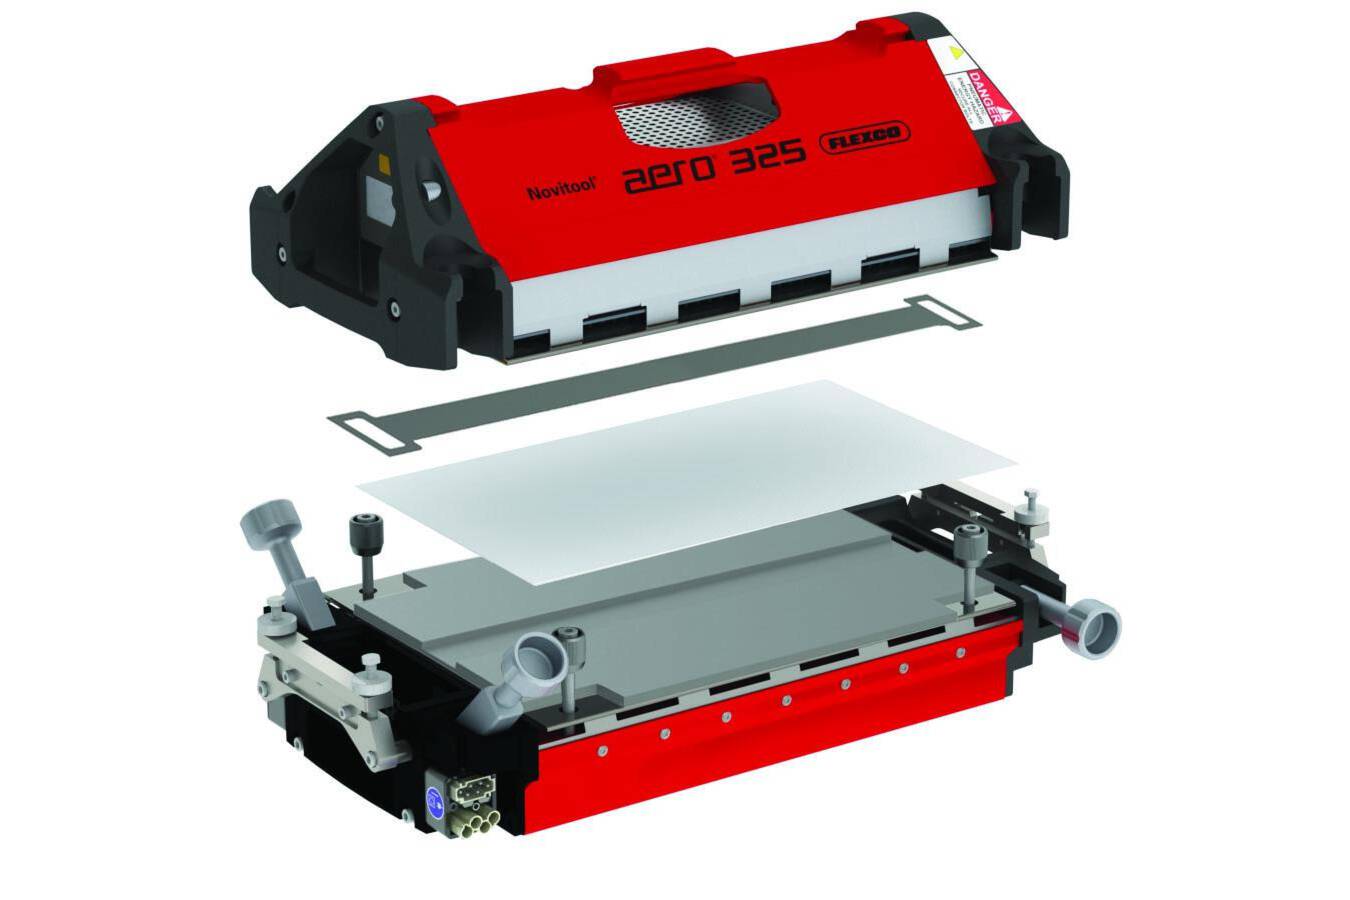 The Aero 325 mobile heating press produces a high-quality joint in just 18 minutes - including heating and cooling.